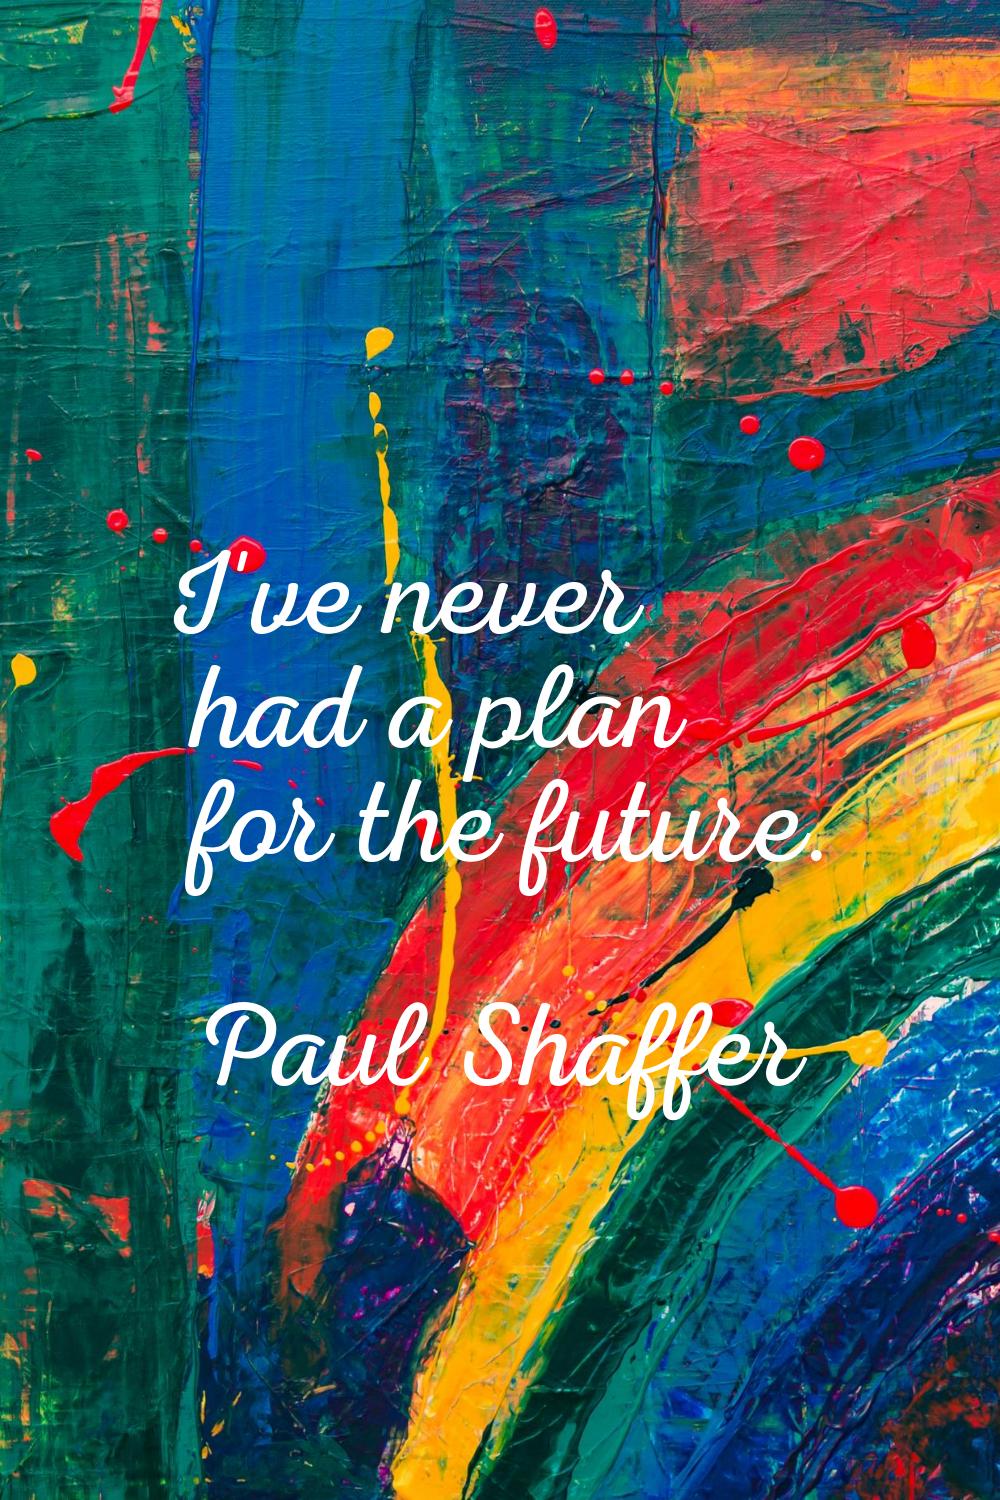 I've never had a plan for the future.